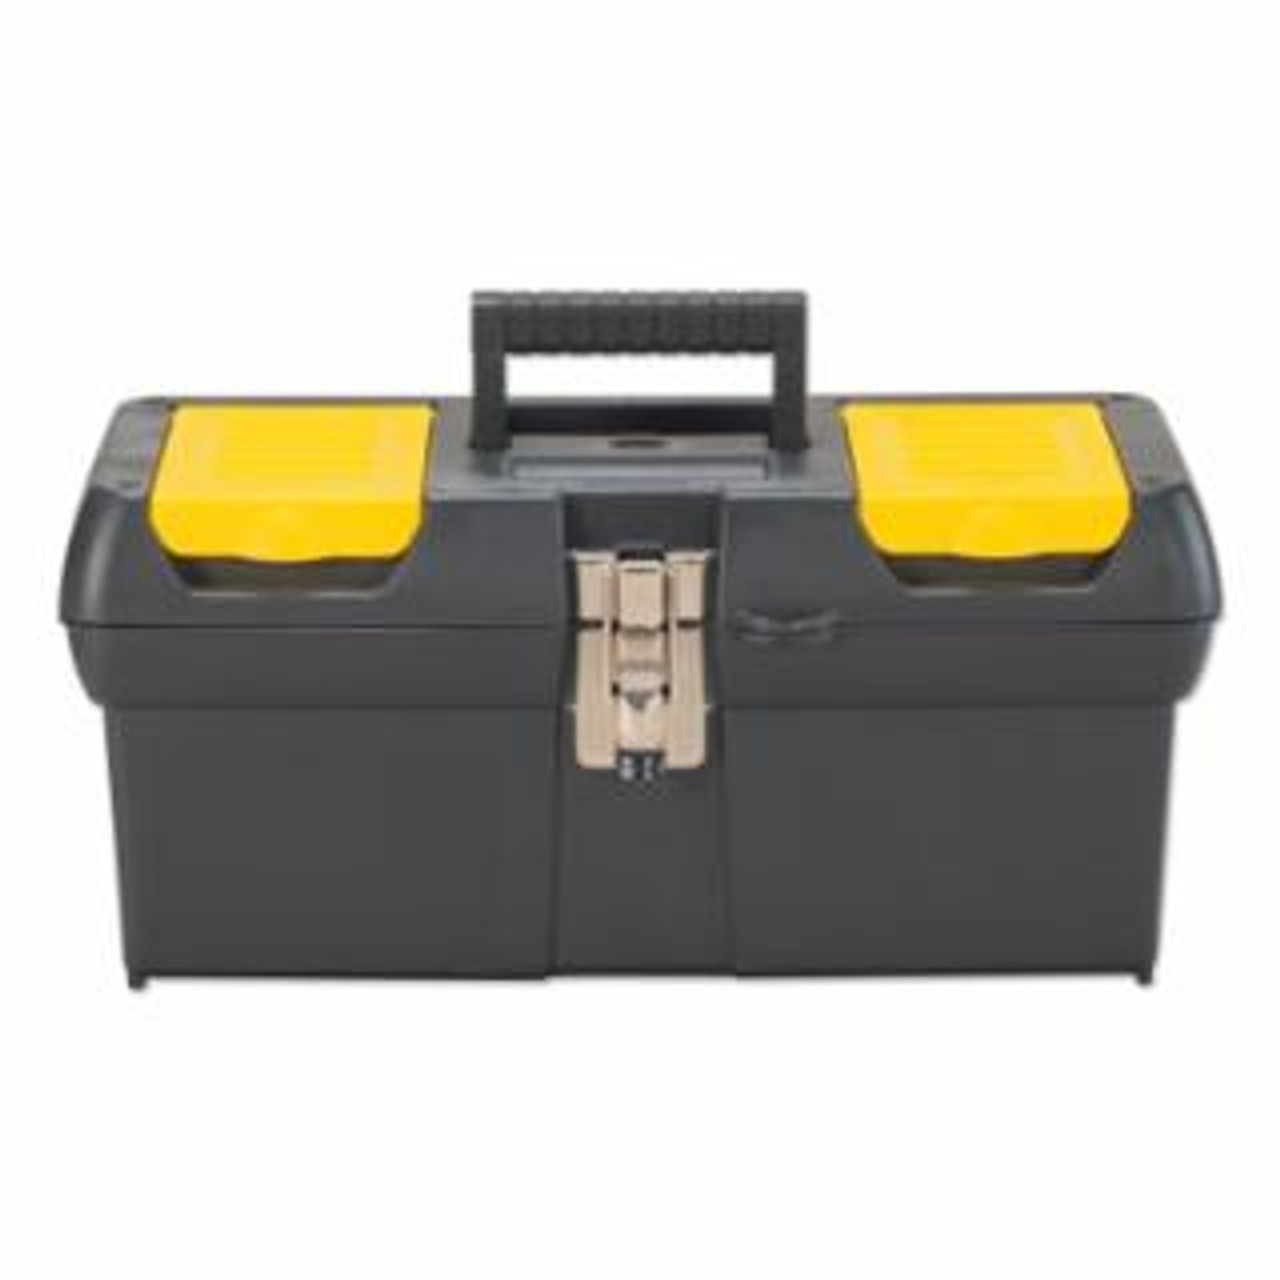 Stanley Series 2000 Tool Box, 16 in x 7 in x 8 in